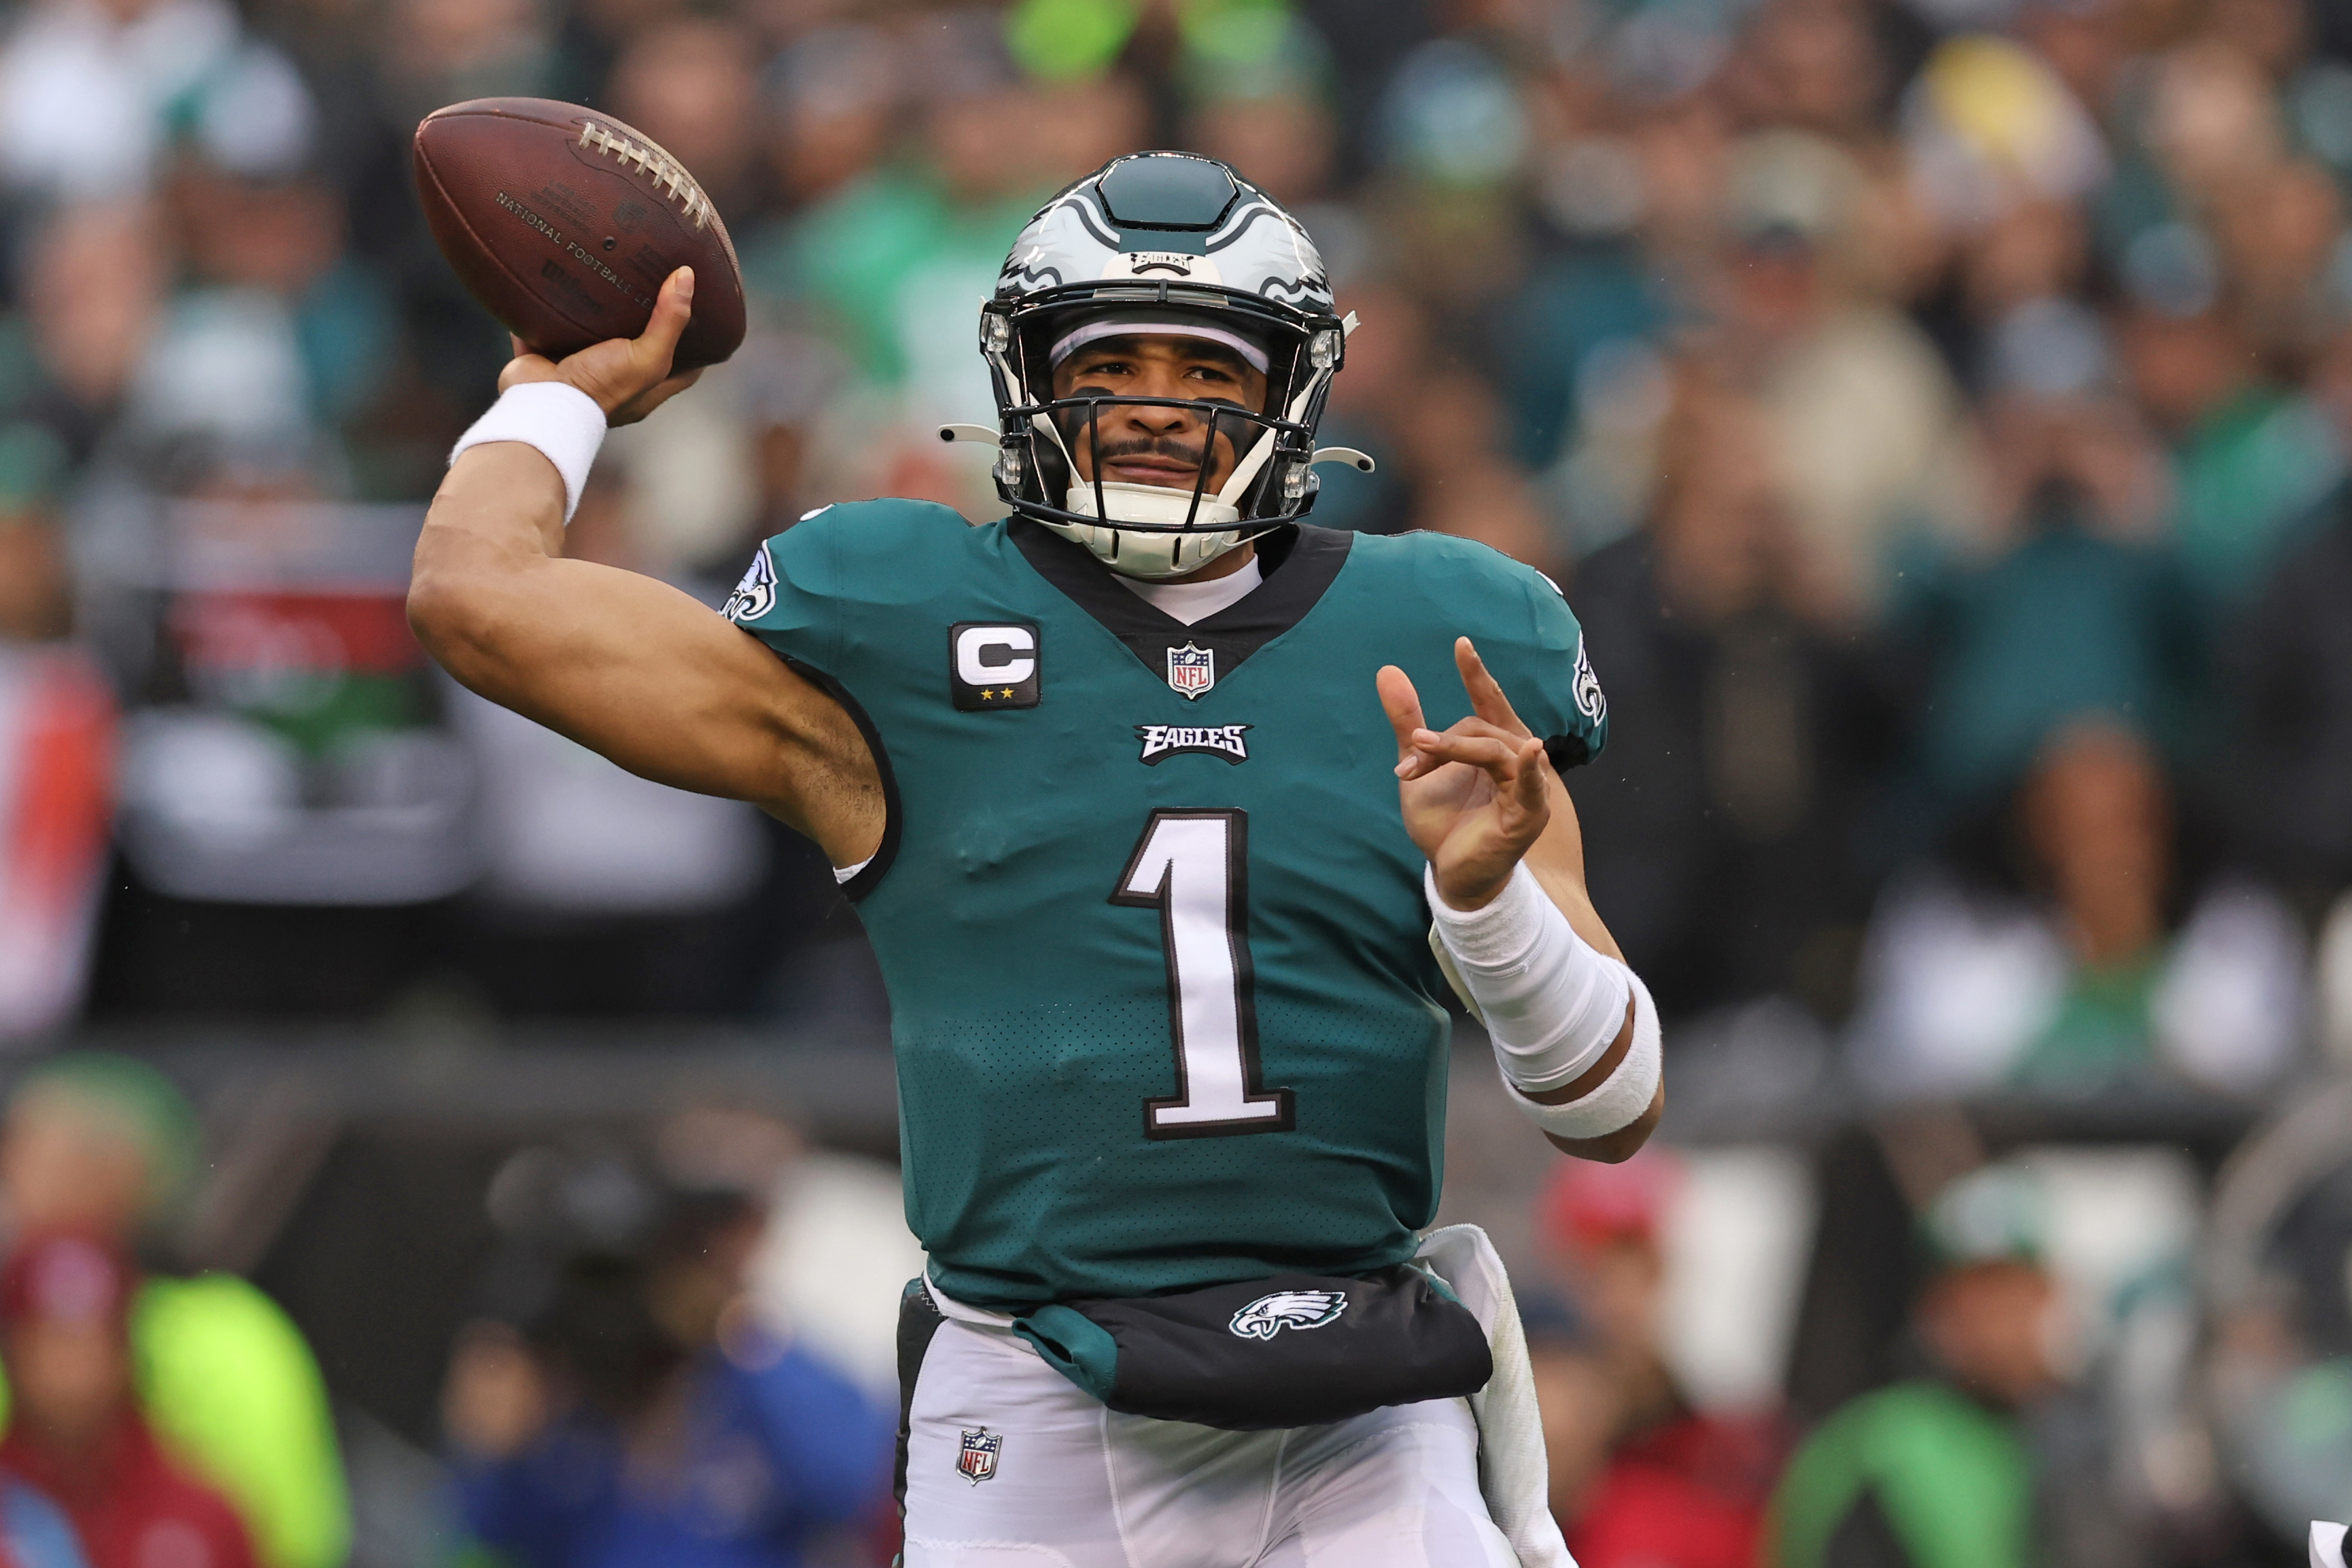 Jan 29, 2023; Philadelphia, Pennsylvania, USA; Philadelphia Eagles quarterback Jalen Hurts (1) throws a pass during the first quarter against the San Francisco 49ers in the NFC Championship game at Lincoln Financial Field. Mandatory Credit: Bill Streicher